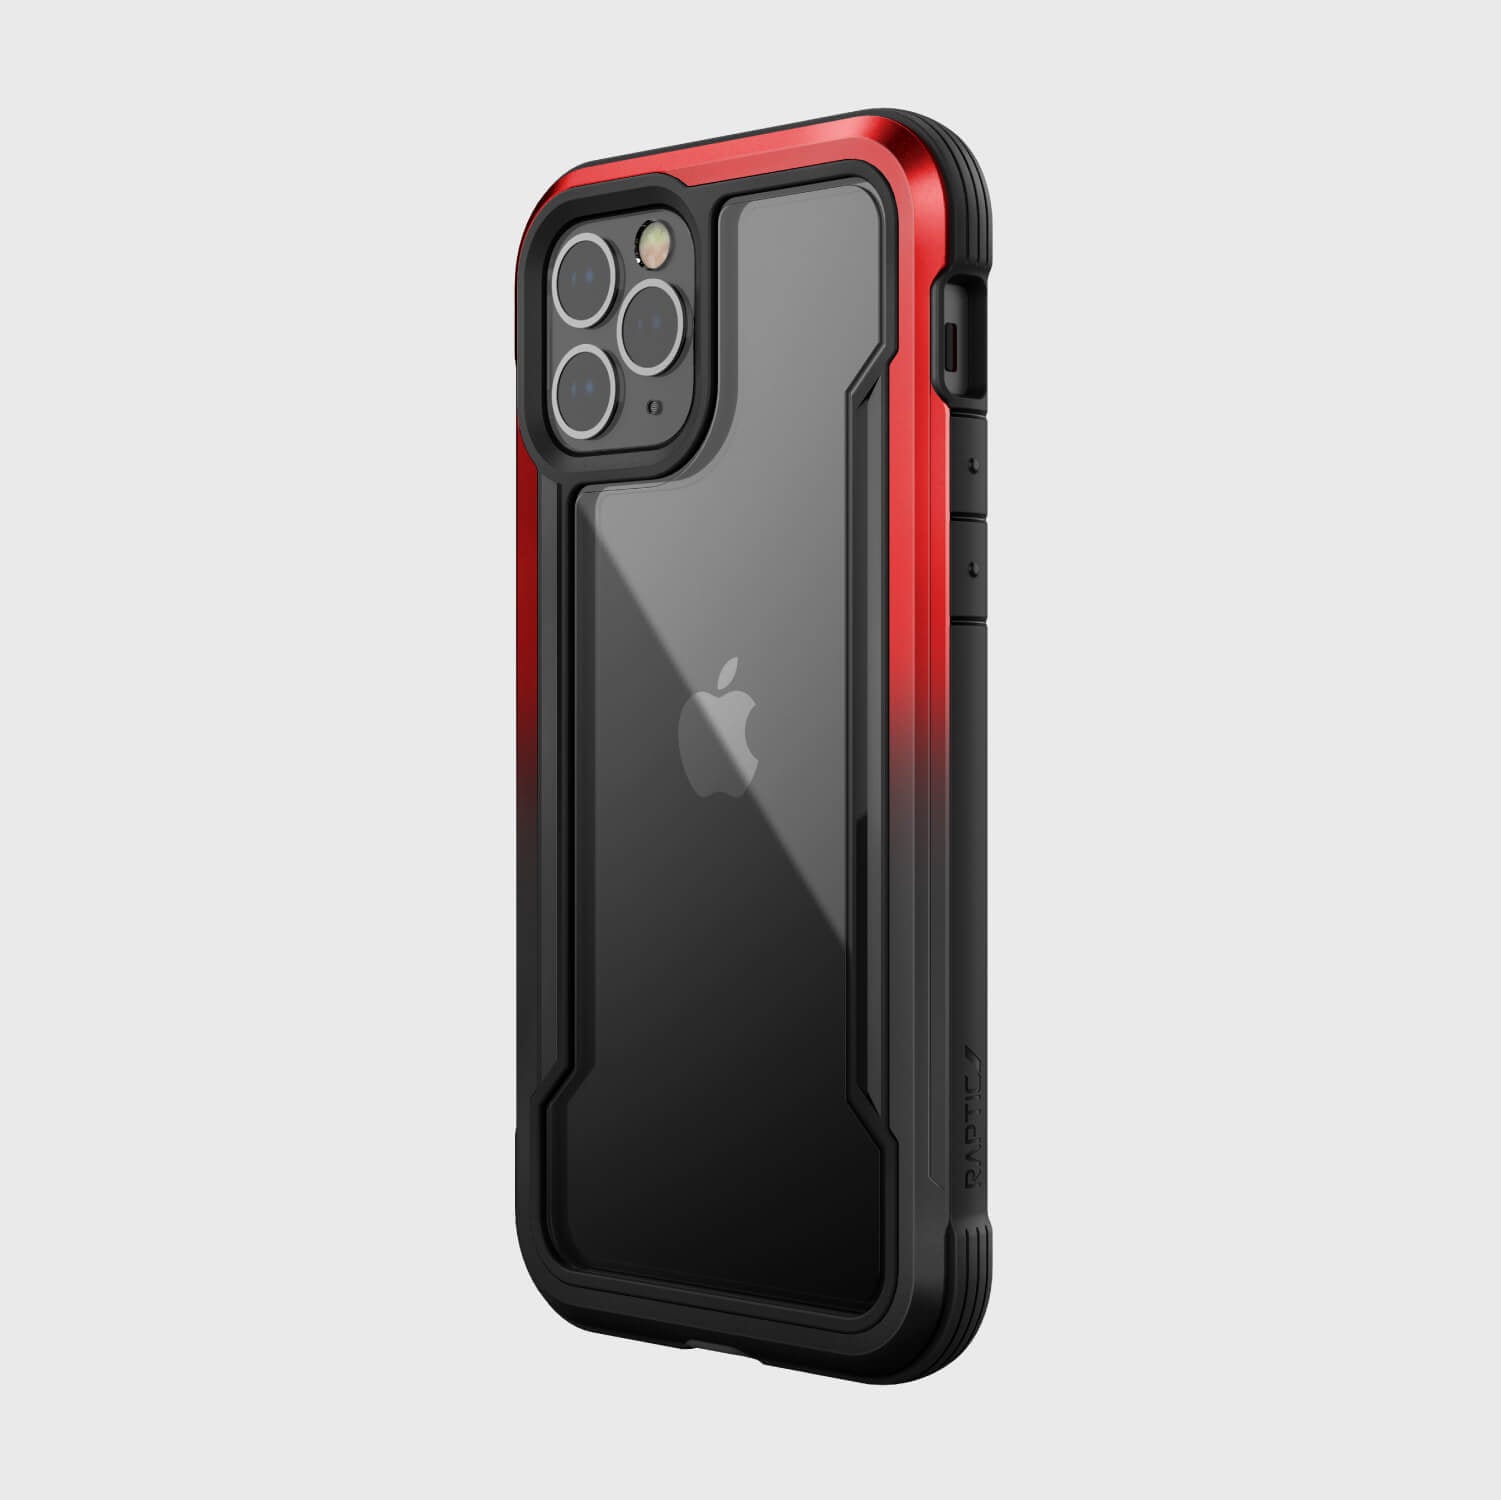 The back of a Raptic SHIELD case for the iPhone 12 Pro Max in red and black, offering 13' foot drop protection.